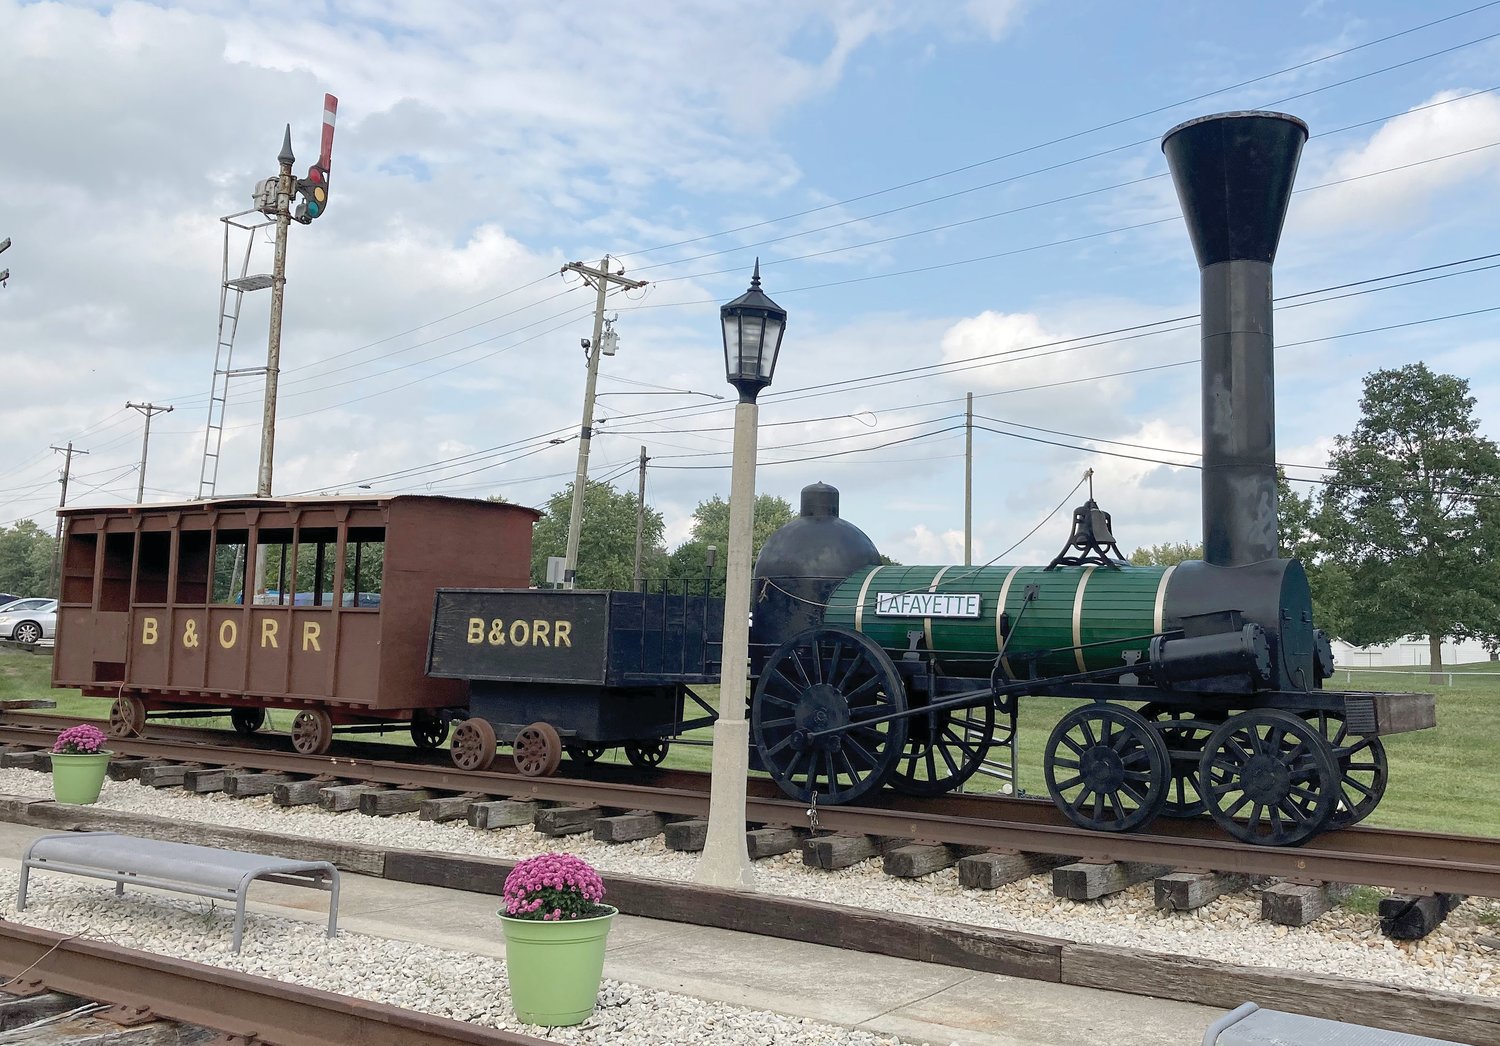 A full-sized replica of the 1837 Norris 4-2-0 Steam Engine is on display at the Linden Depot Museum.